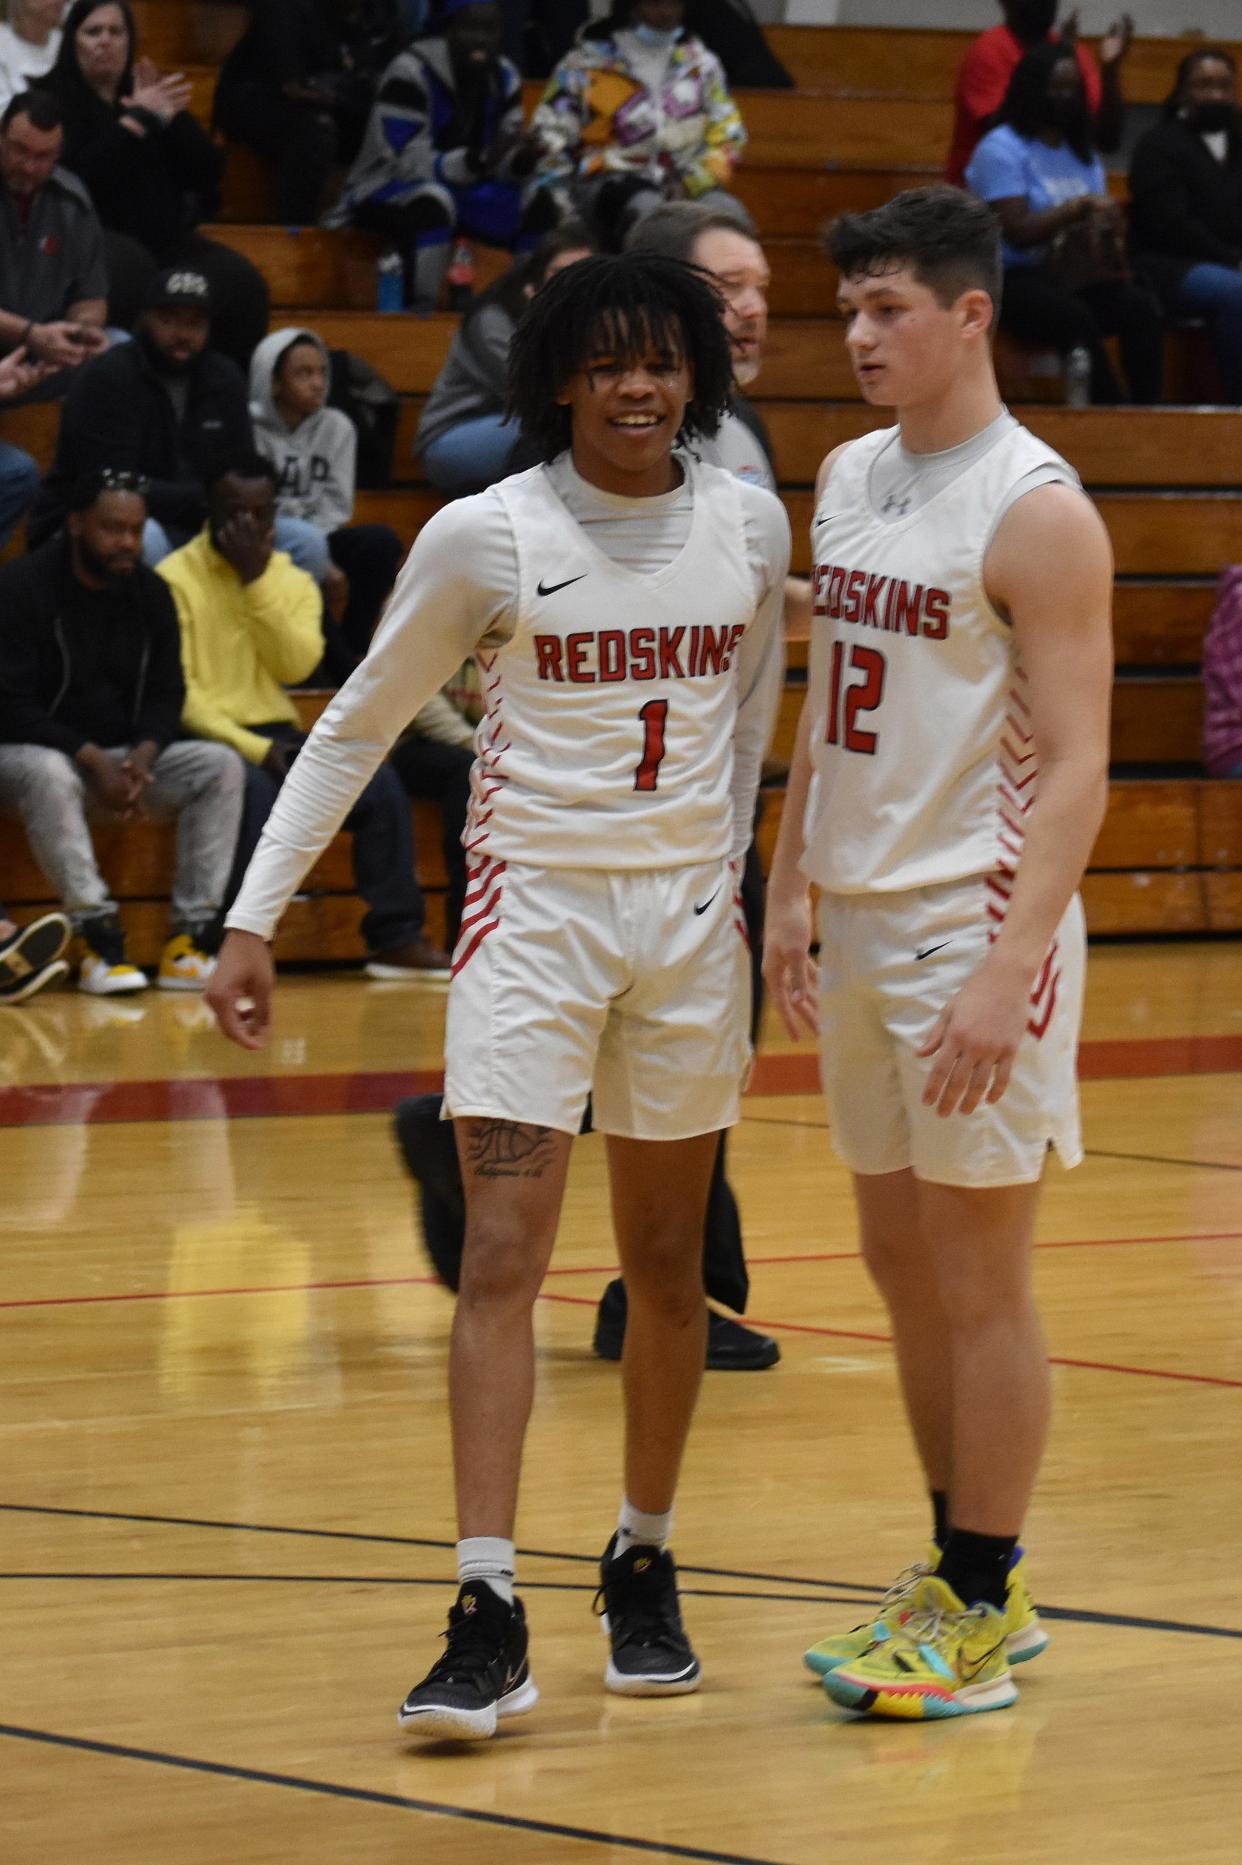 Bryan County High School junior point guard Jamal Campbell (1) with teammate Tanner Ennis (12), a sophomore.